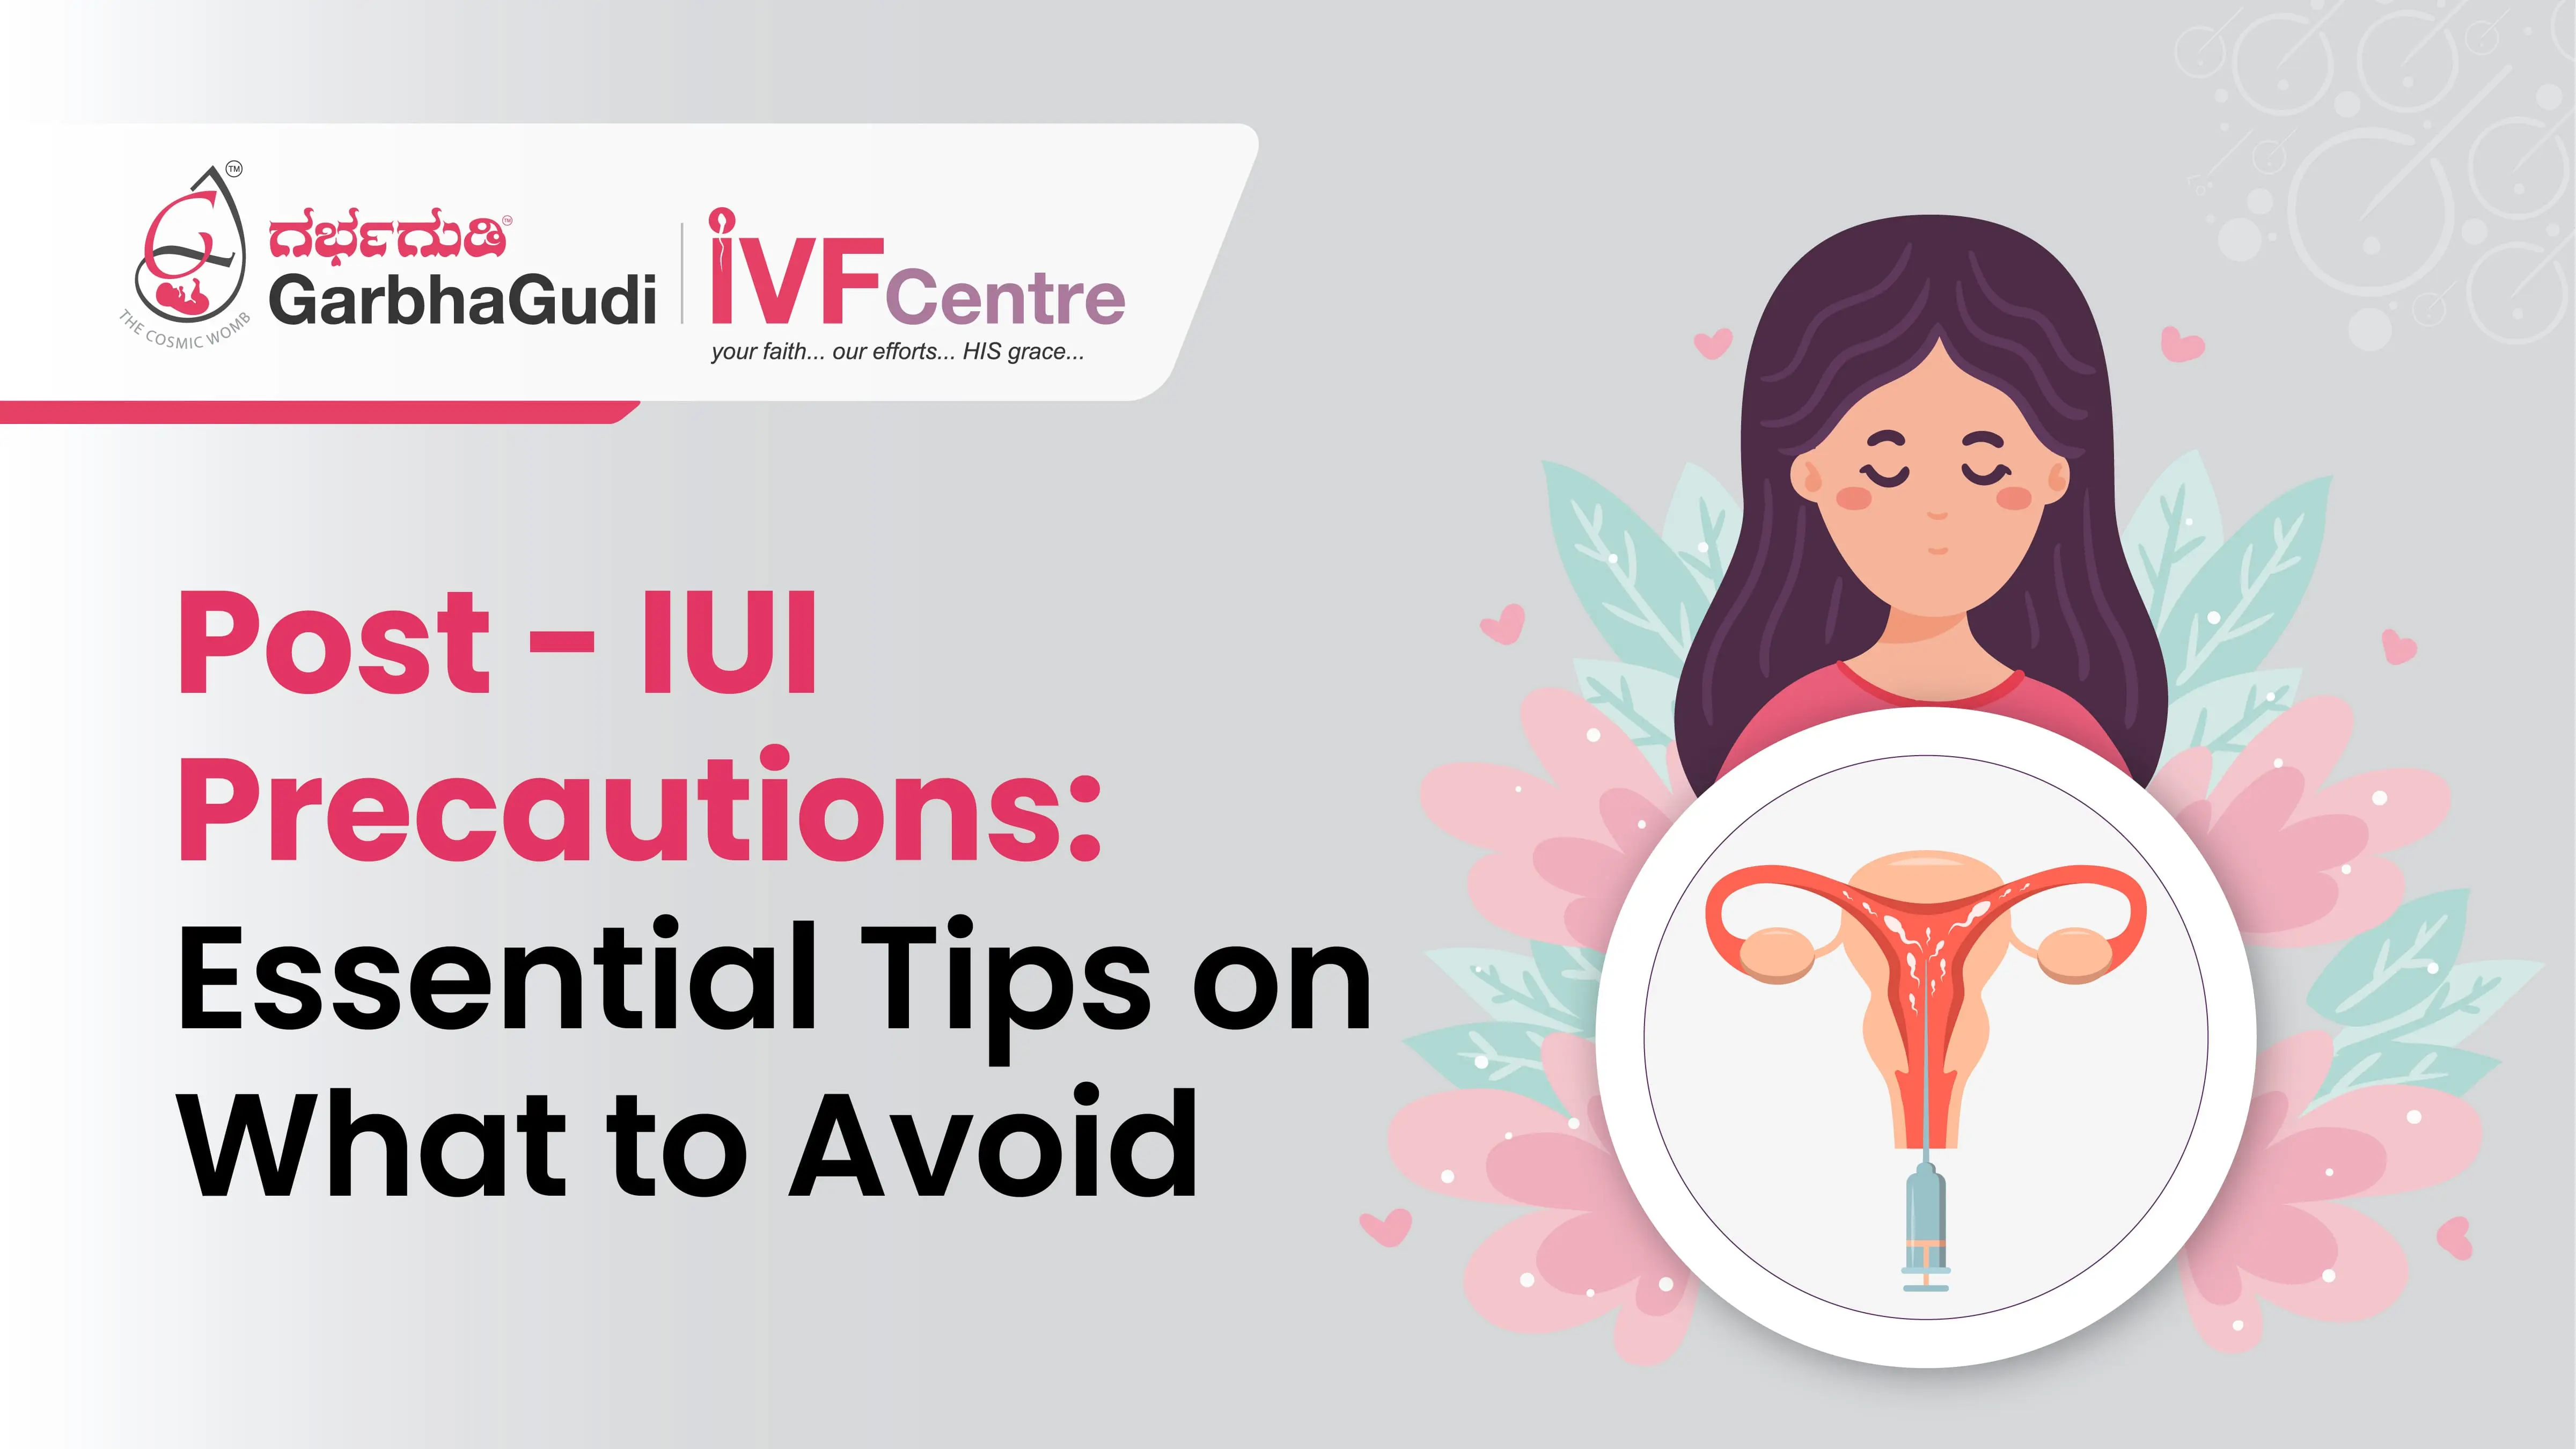 Post-IUI Precautions: Essential Tips on What to Avoid